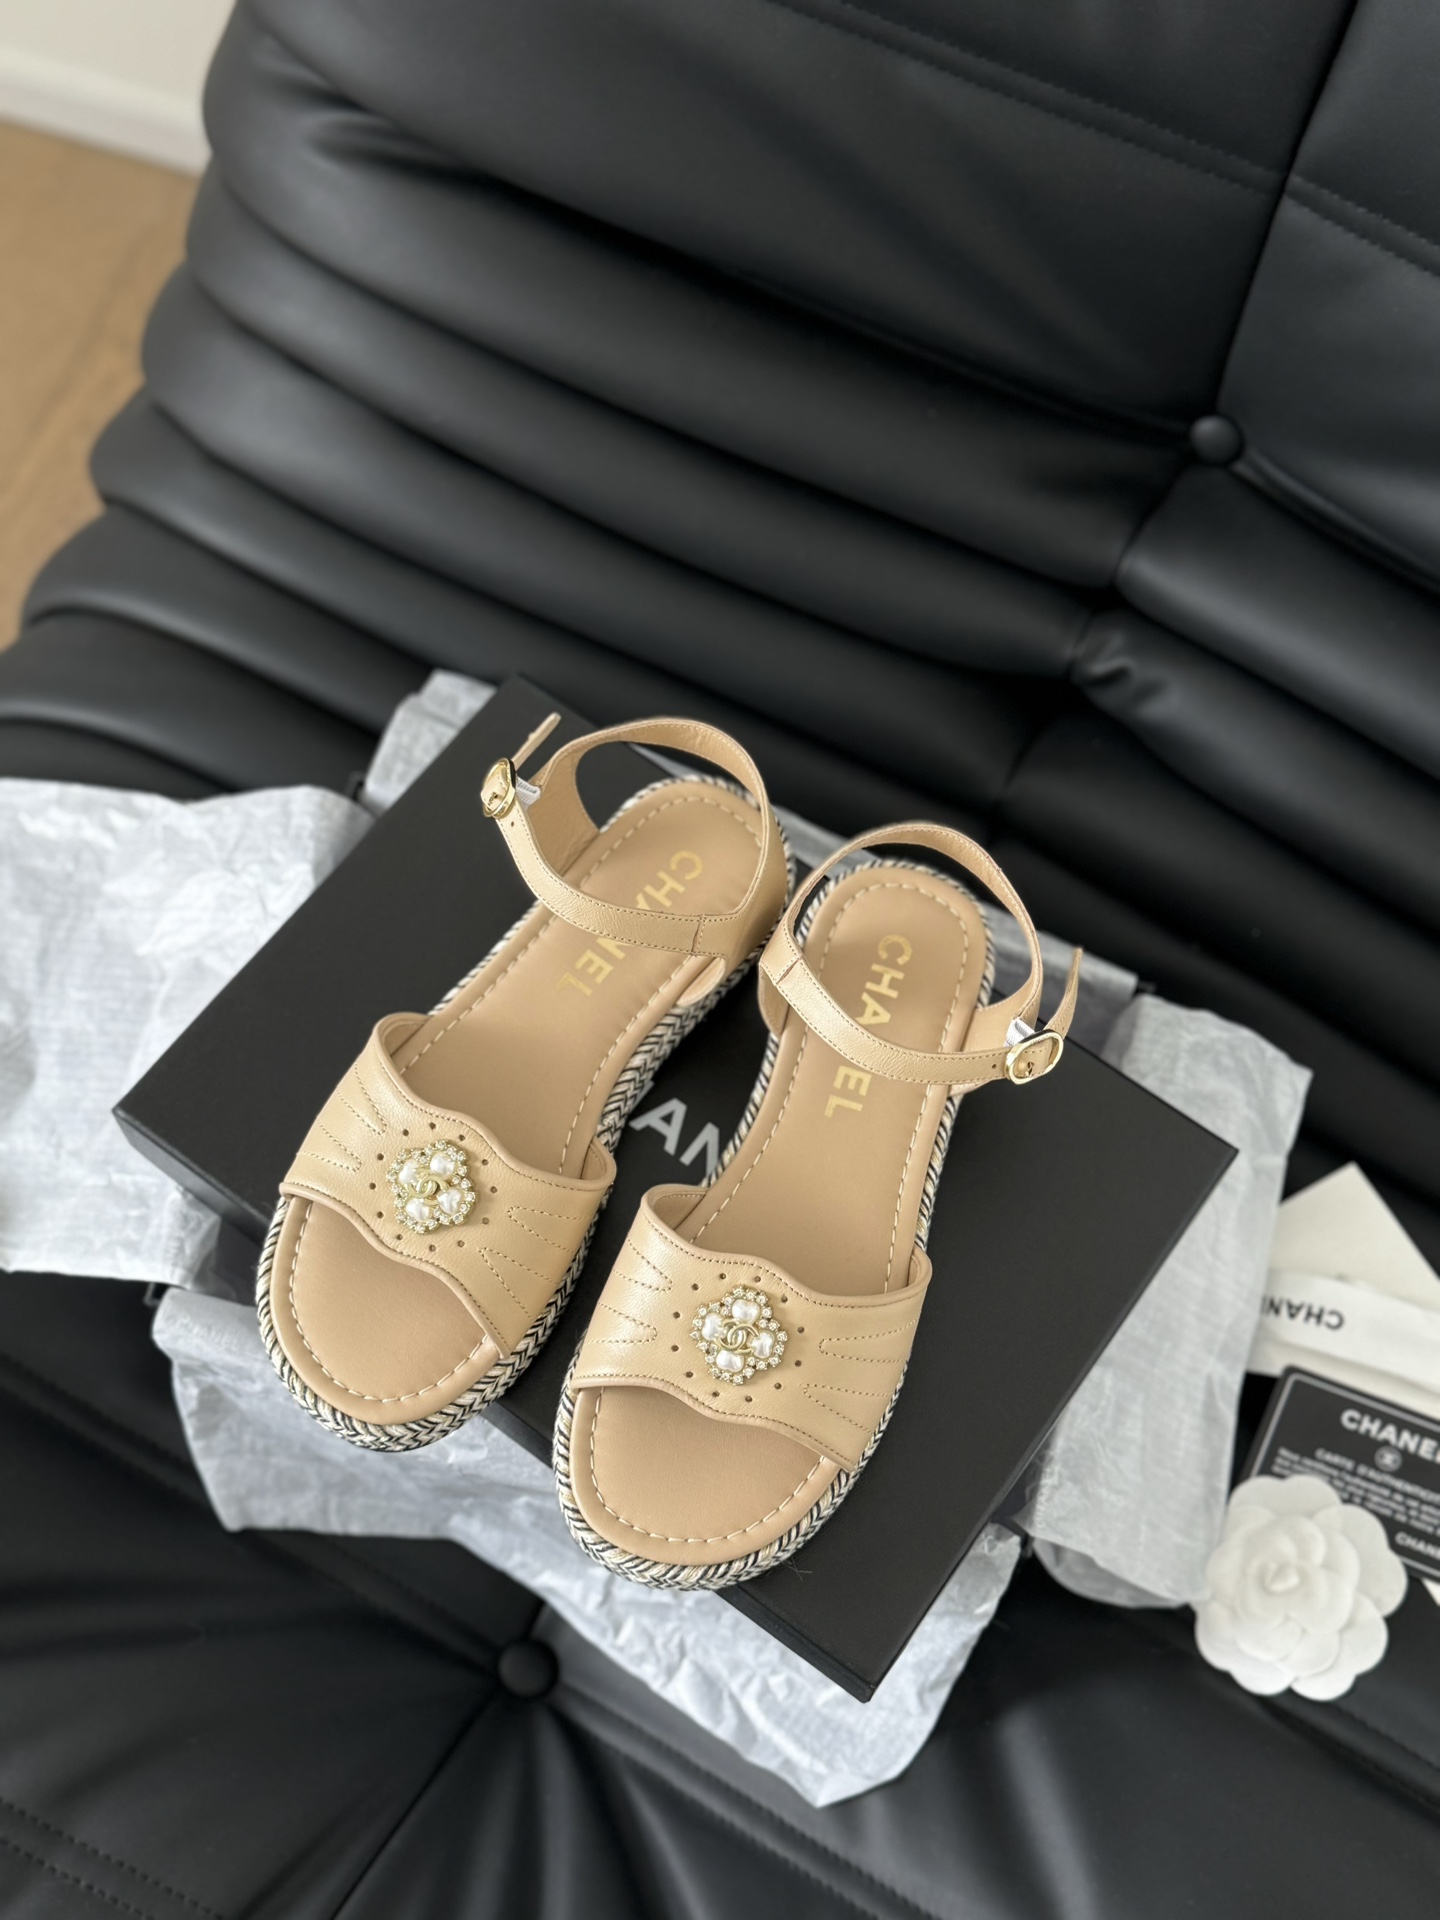 Chanel Shoes Sandals Calfskin Cowhide Rubber Sheepskin Straw Woven Summer Collection Vintage